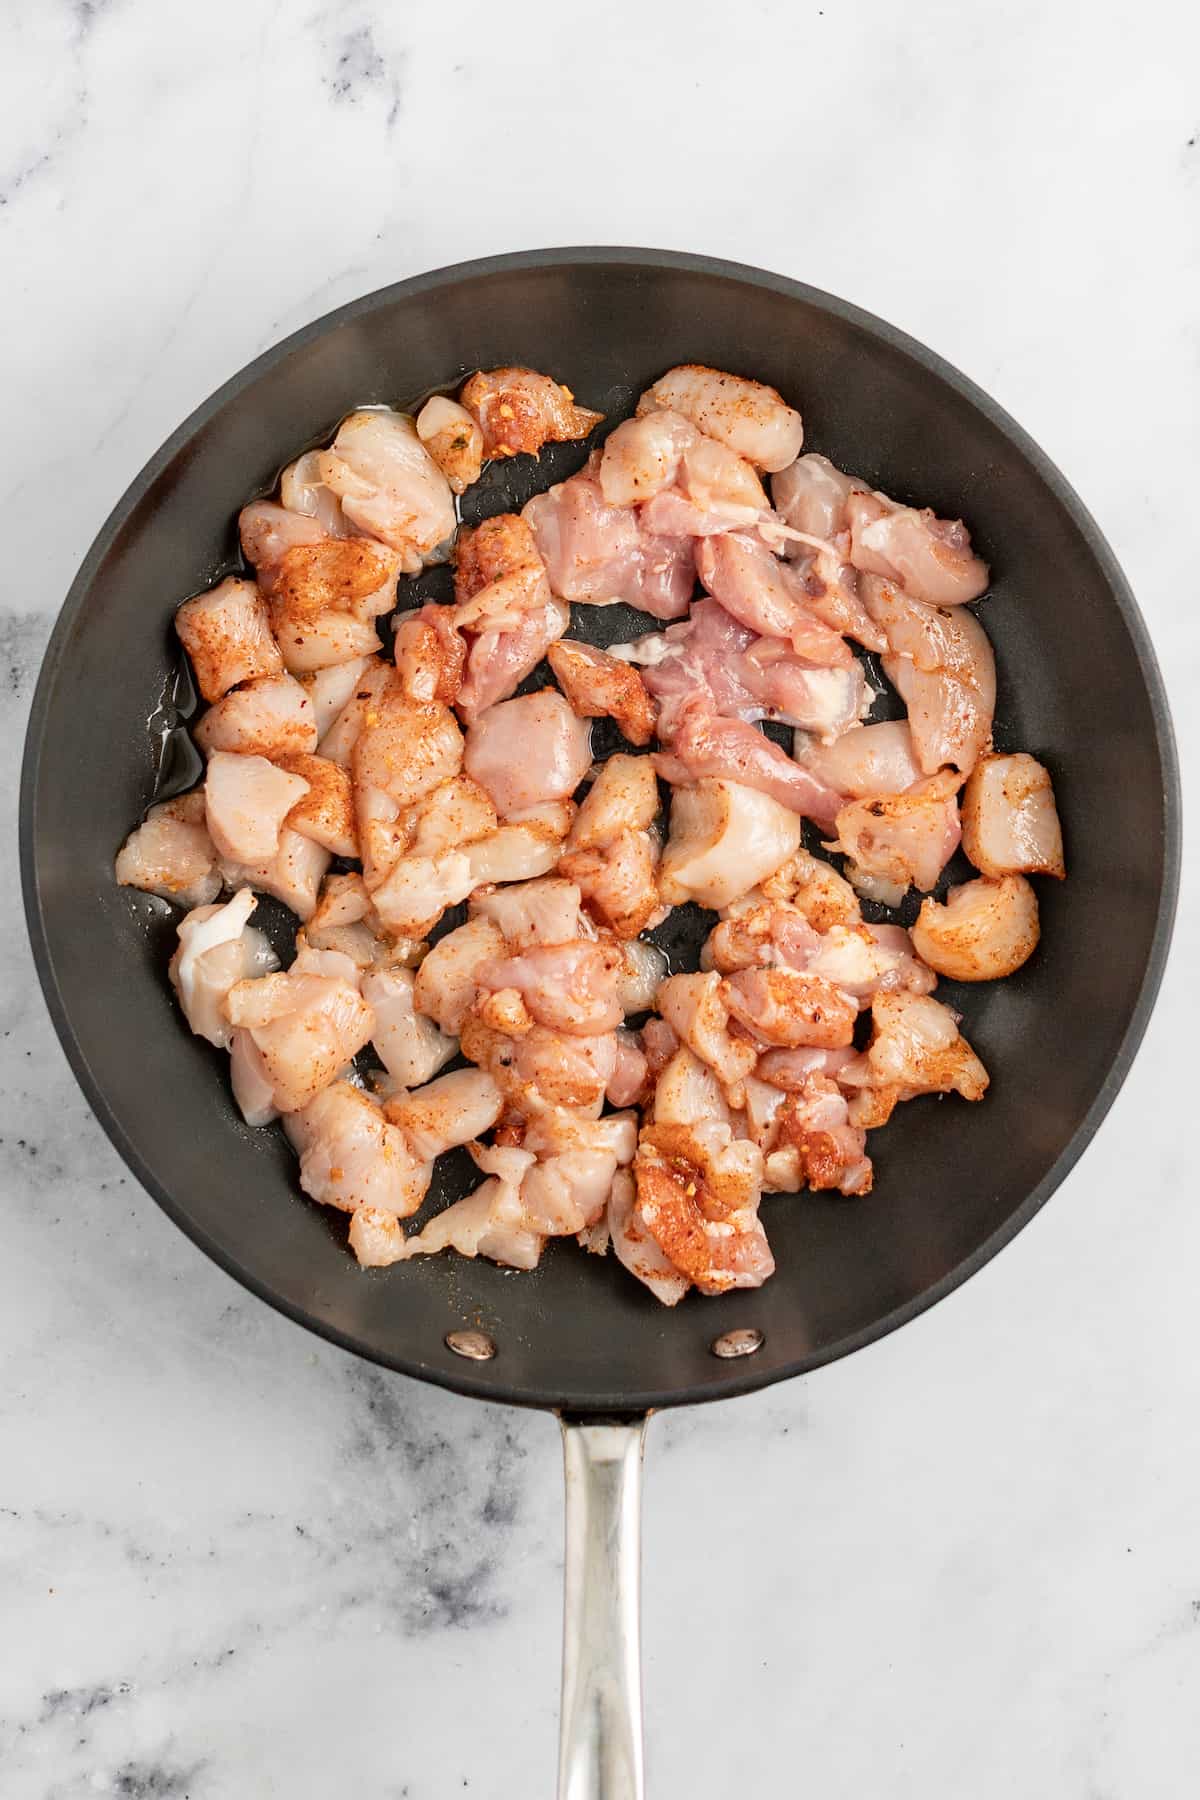 cooking bites of chicken in a saute pan that have been seasoned with ،es